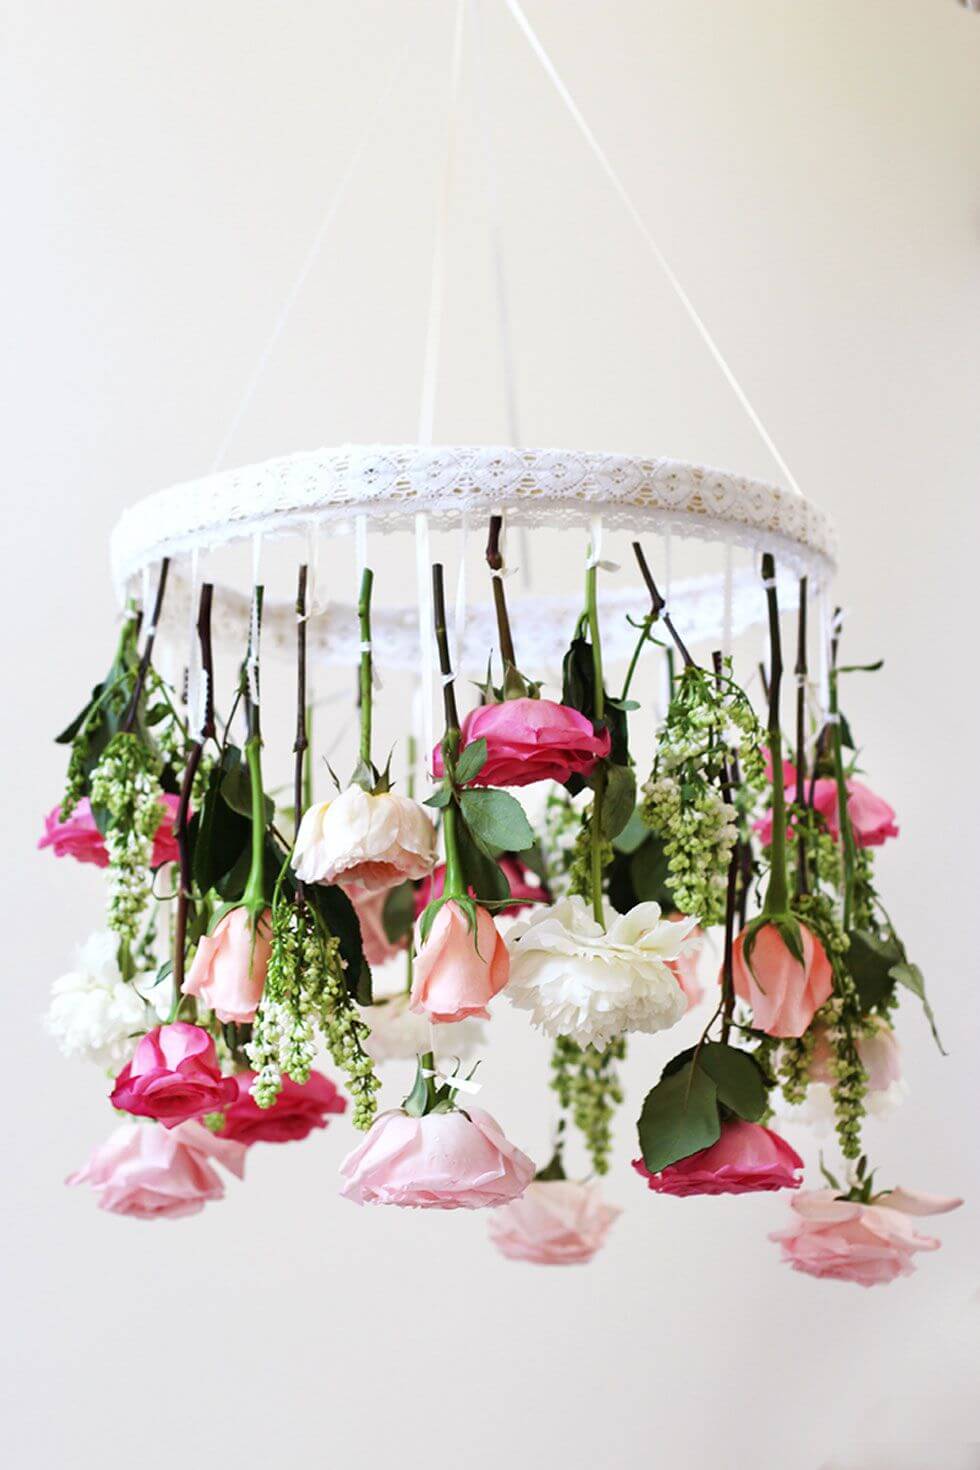 Special romantic flowers. 1 70+ Hottest Marriage Anniversary Decoration Ideas at Home - 50